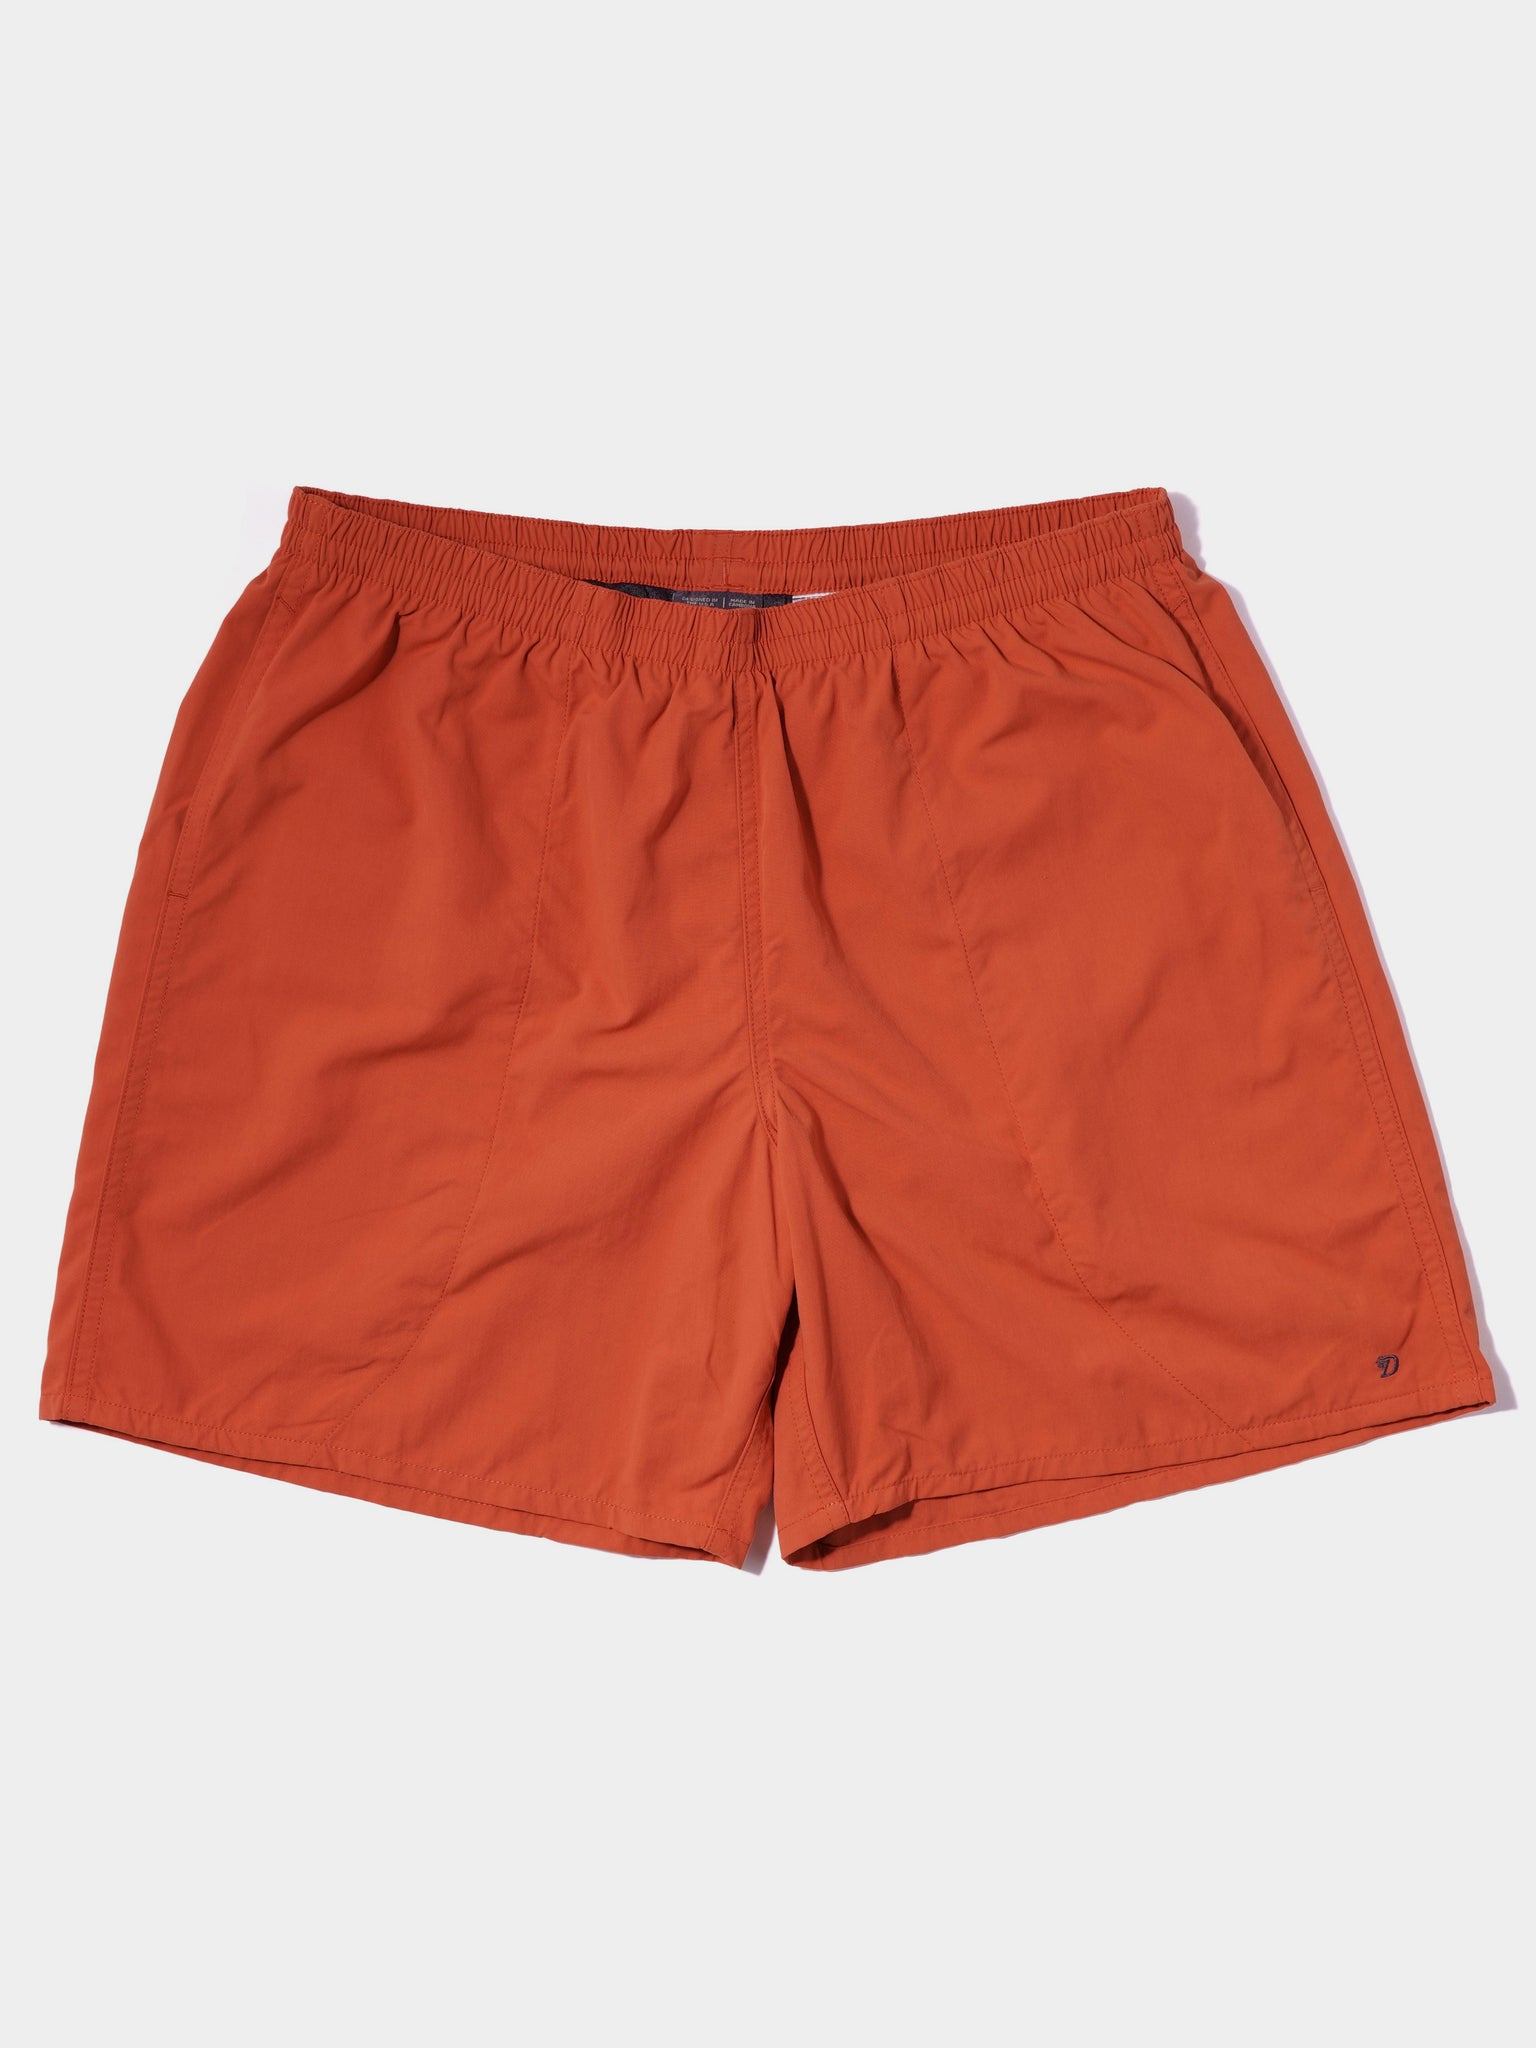 Scout Shorts 7" - Cinnamon Teal